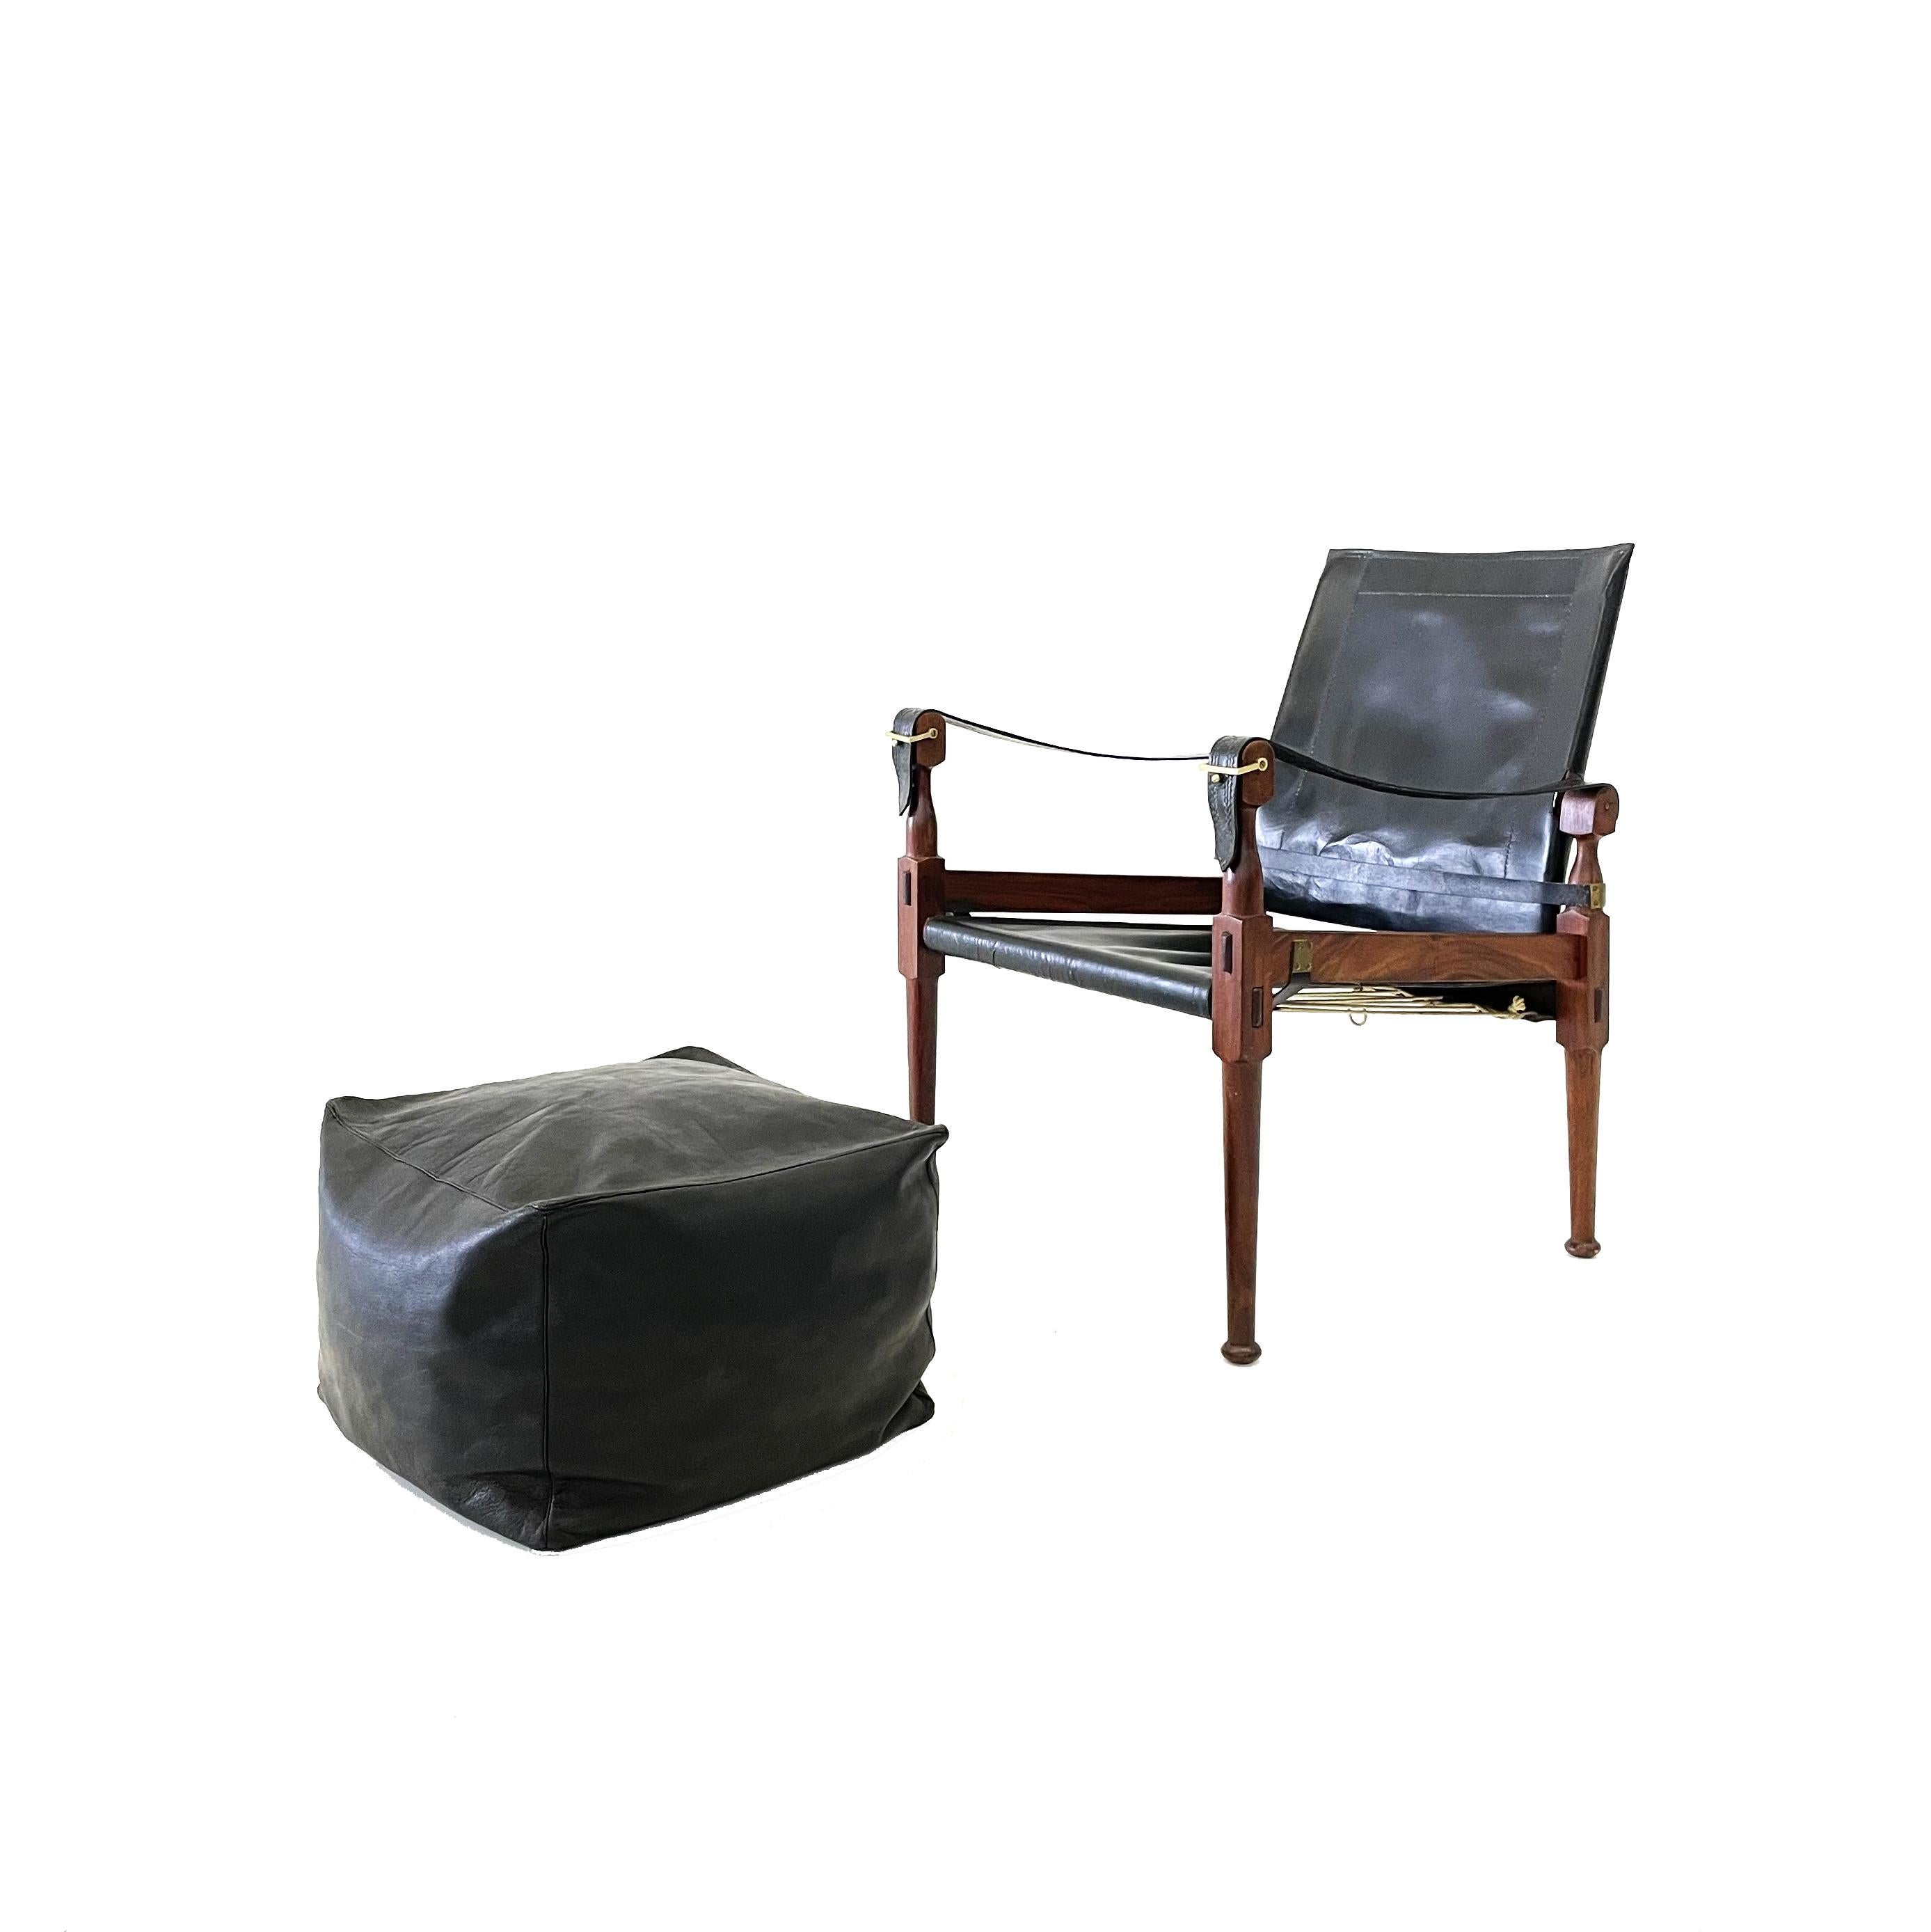 'Safari' lounge chair and ottoman, wood, black leather and brass, Pakistan, 1970s

This 'Safari' armchair shows very elegant and well designed lines, in combination with carefully crafted wood joints. The black leather with multiple straps completes